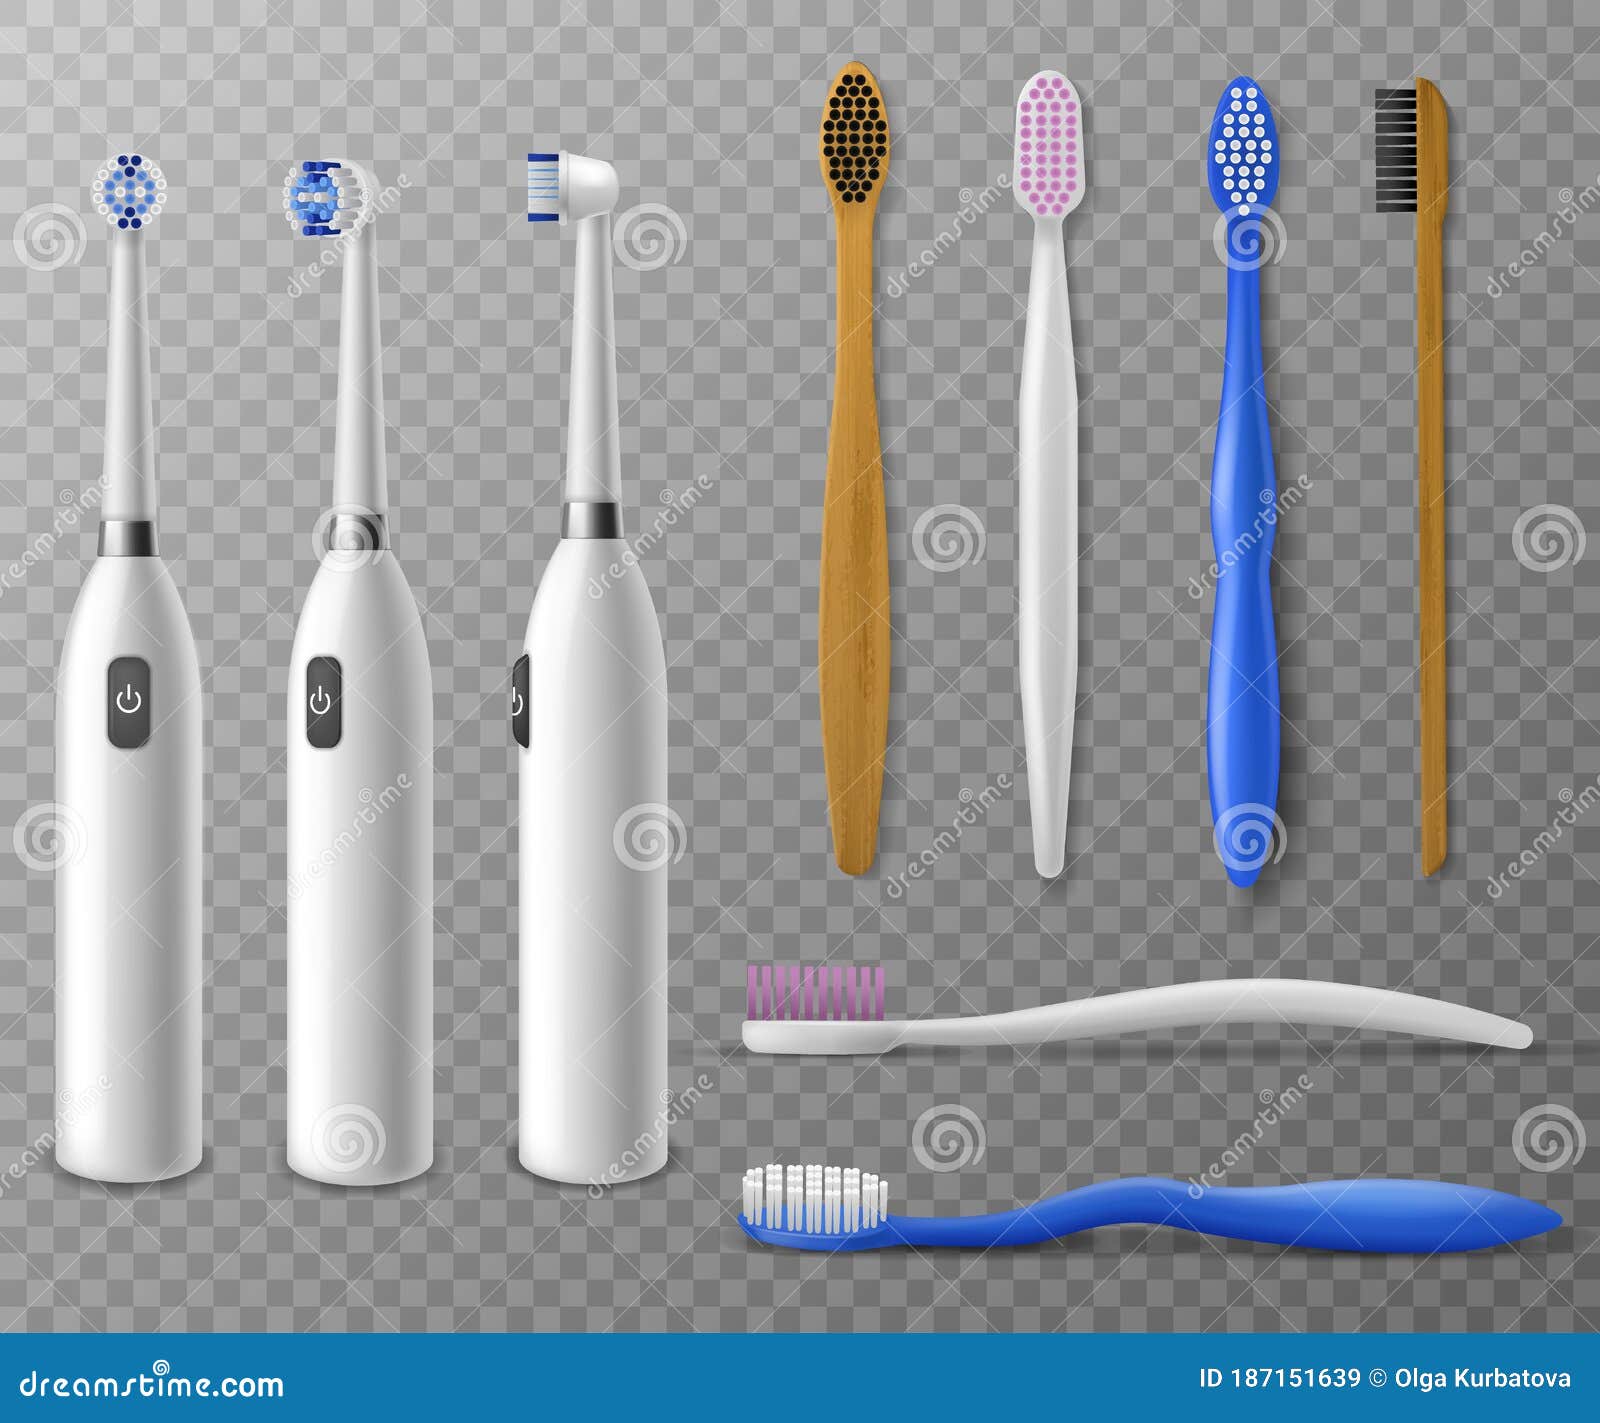 Download Toothbrushes Mockup. Realistic Toothbrush In Different Angles, Promo Items Daily Morning Mouth ...